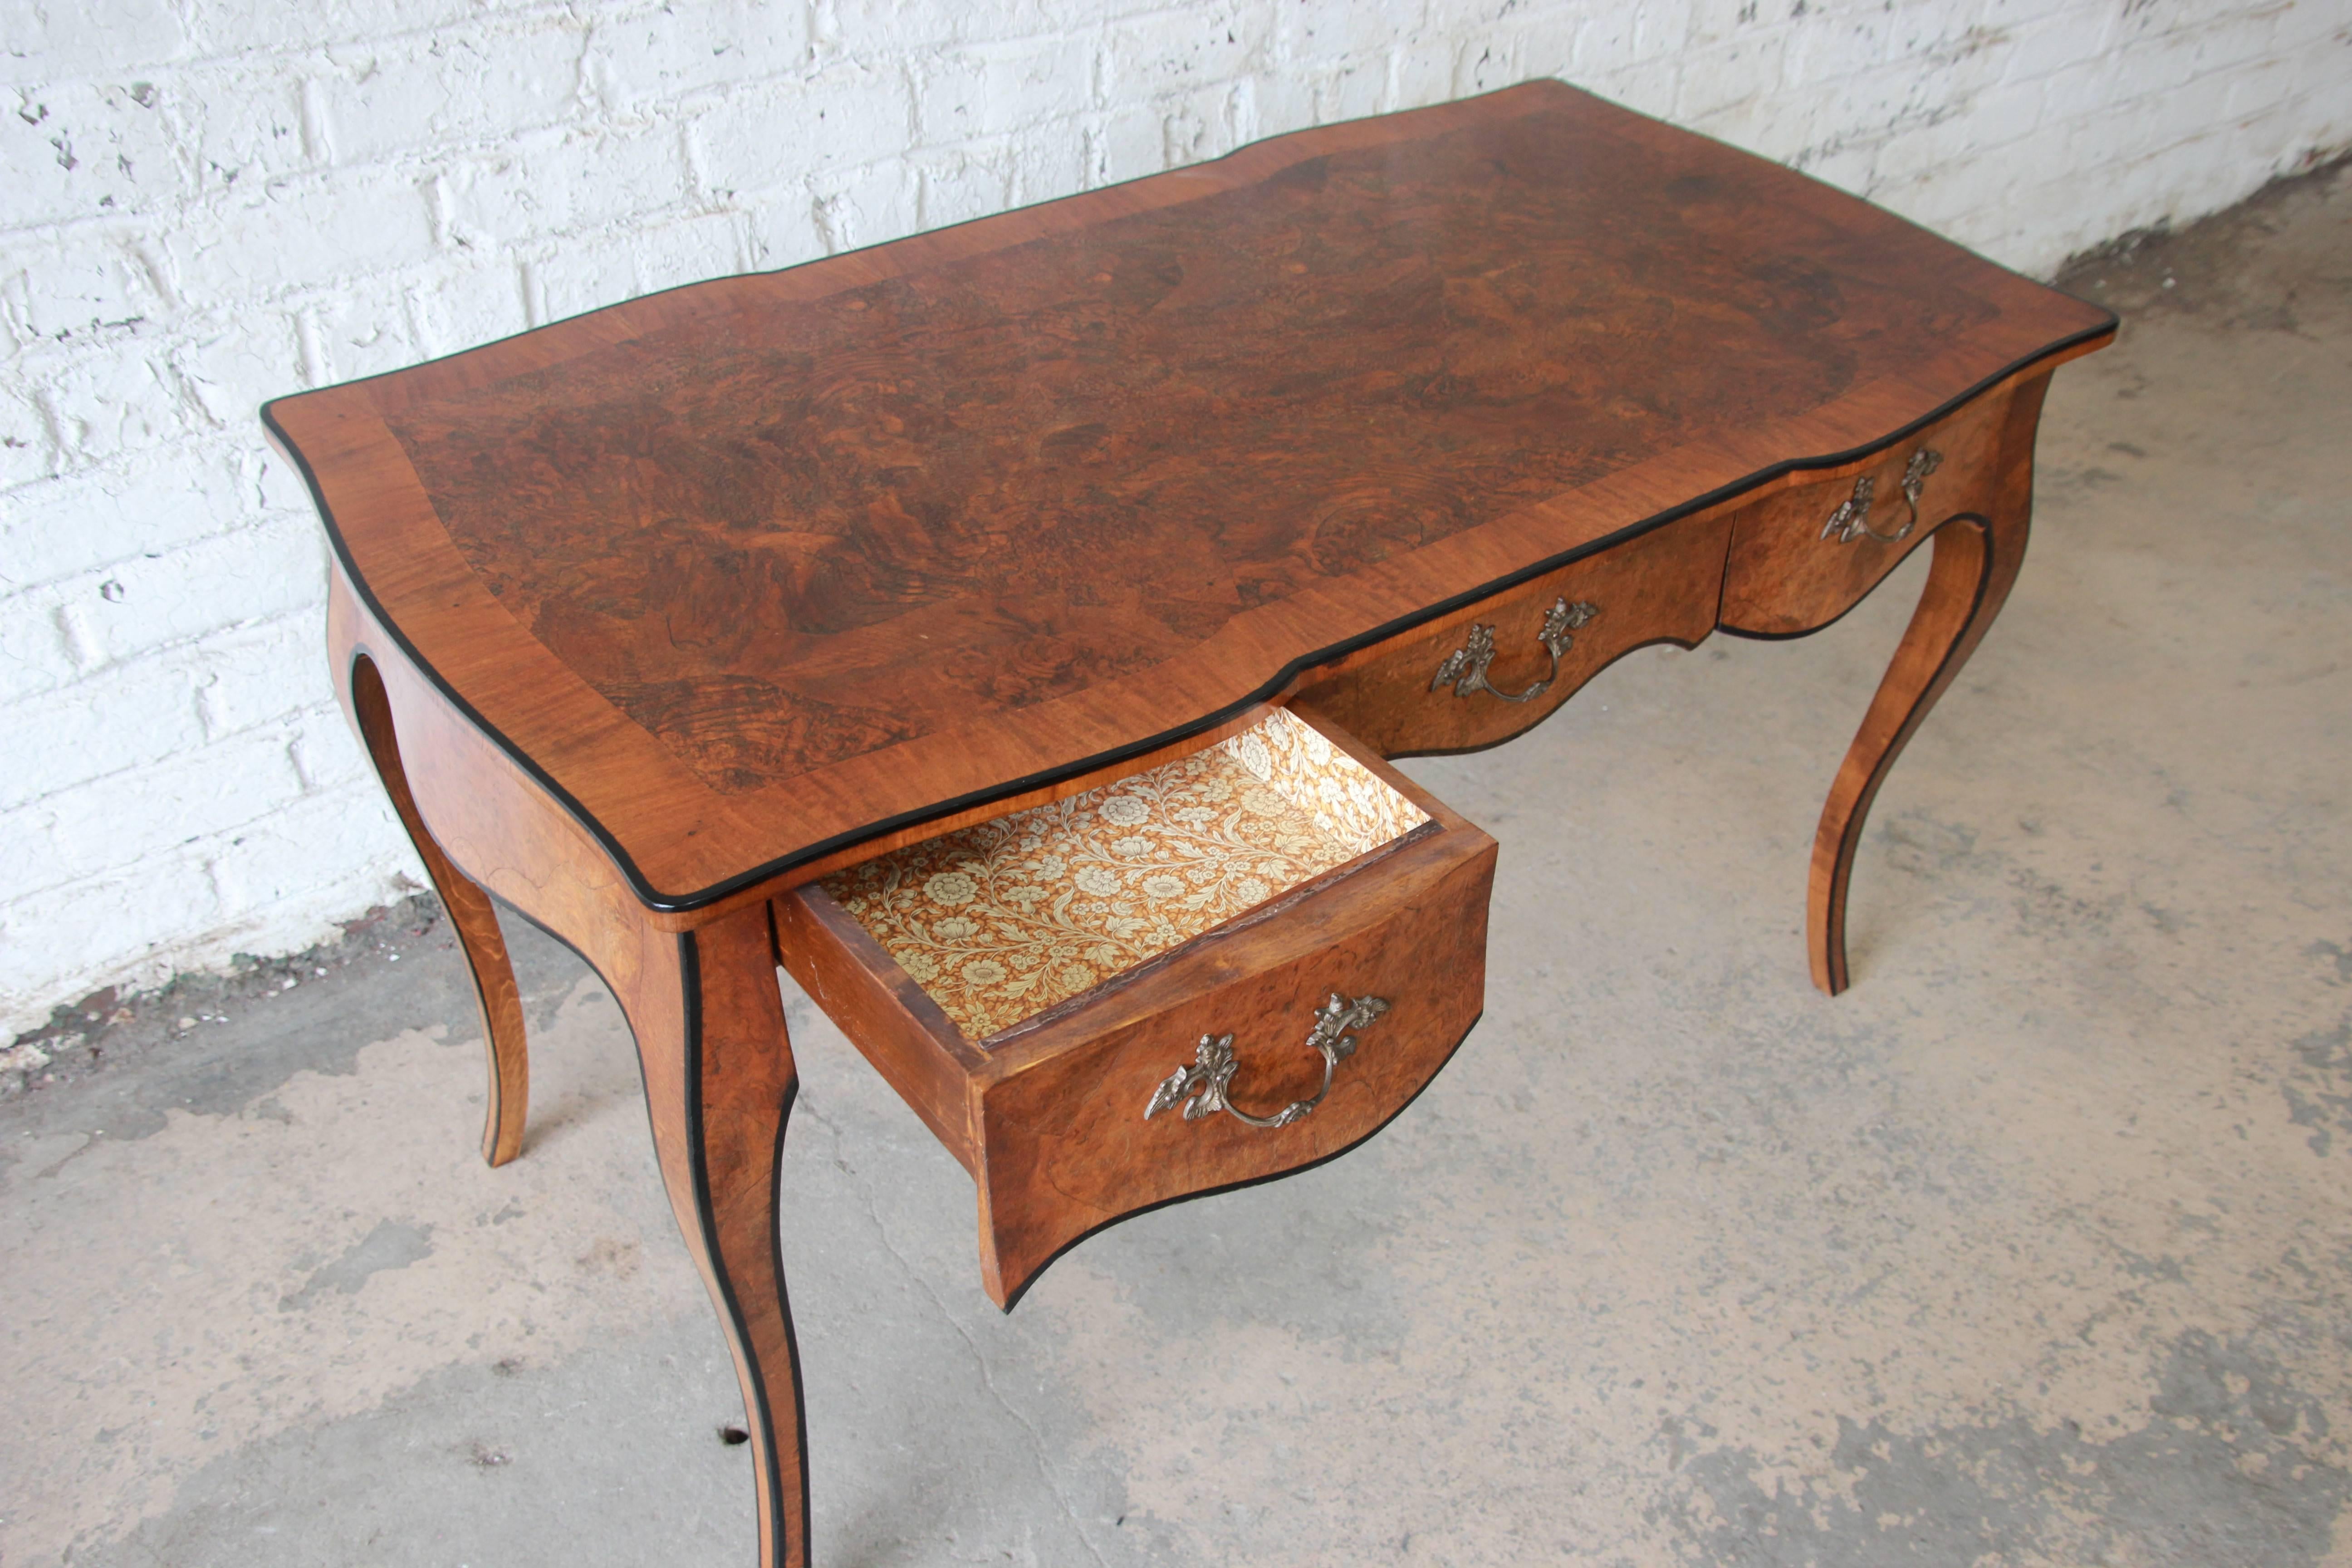 Early 20th Century Antique Italian Burl Wood Writing Desk with Cabriole Legs